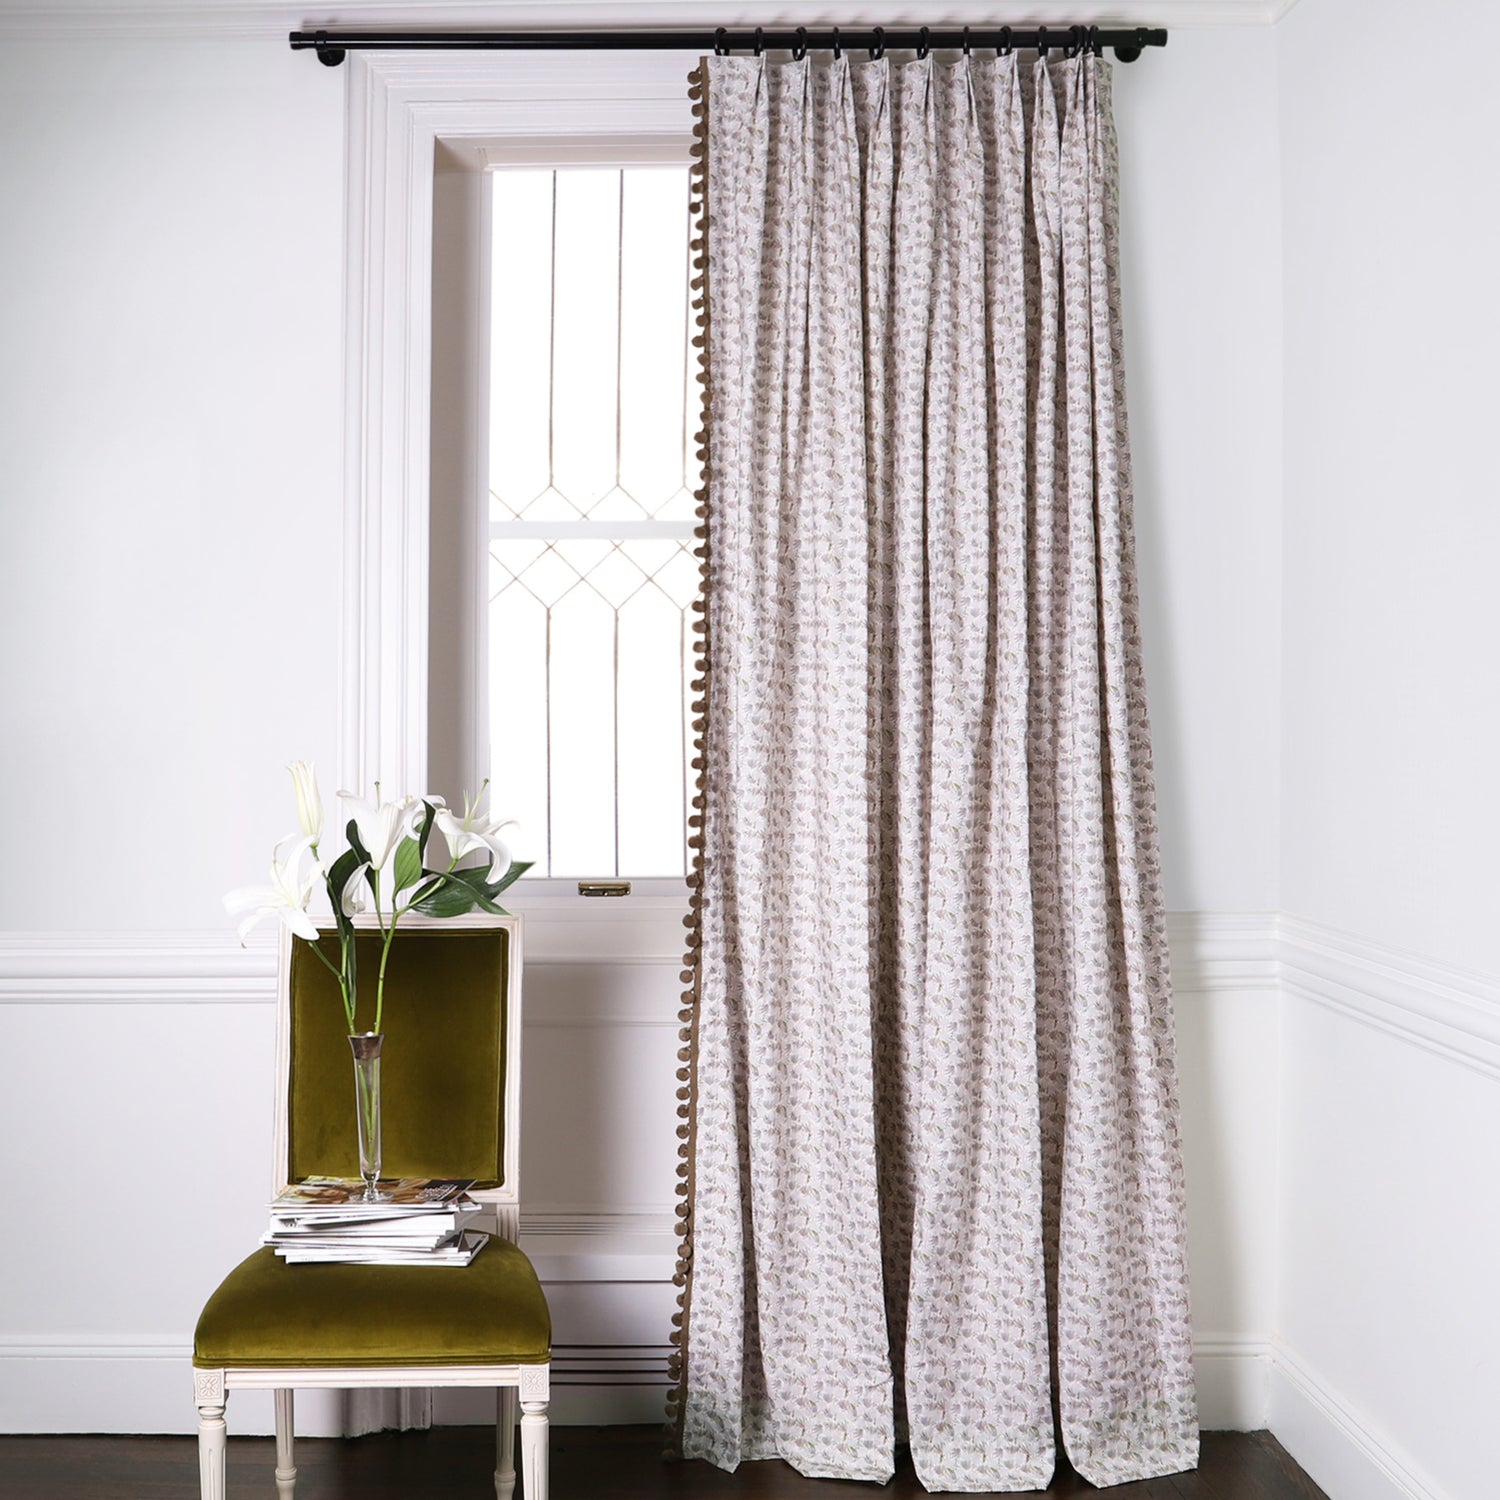 Floral Blackout Curtains to Match Any Room's Decor